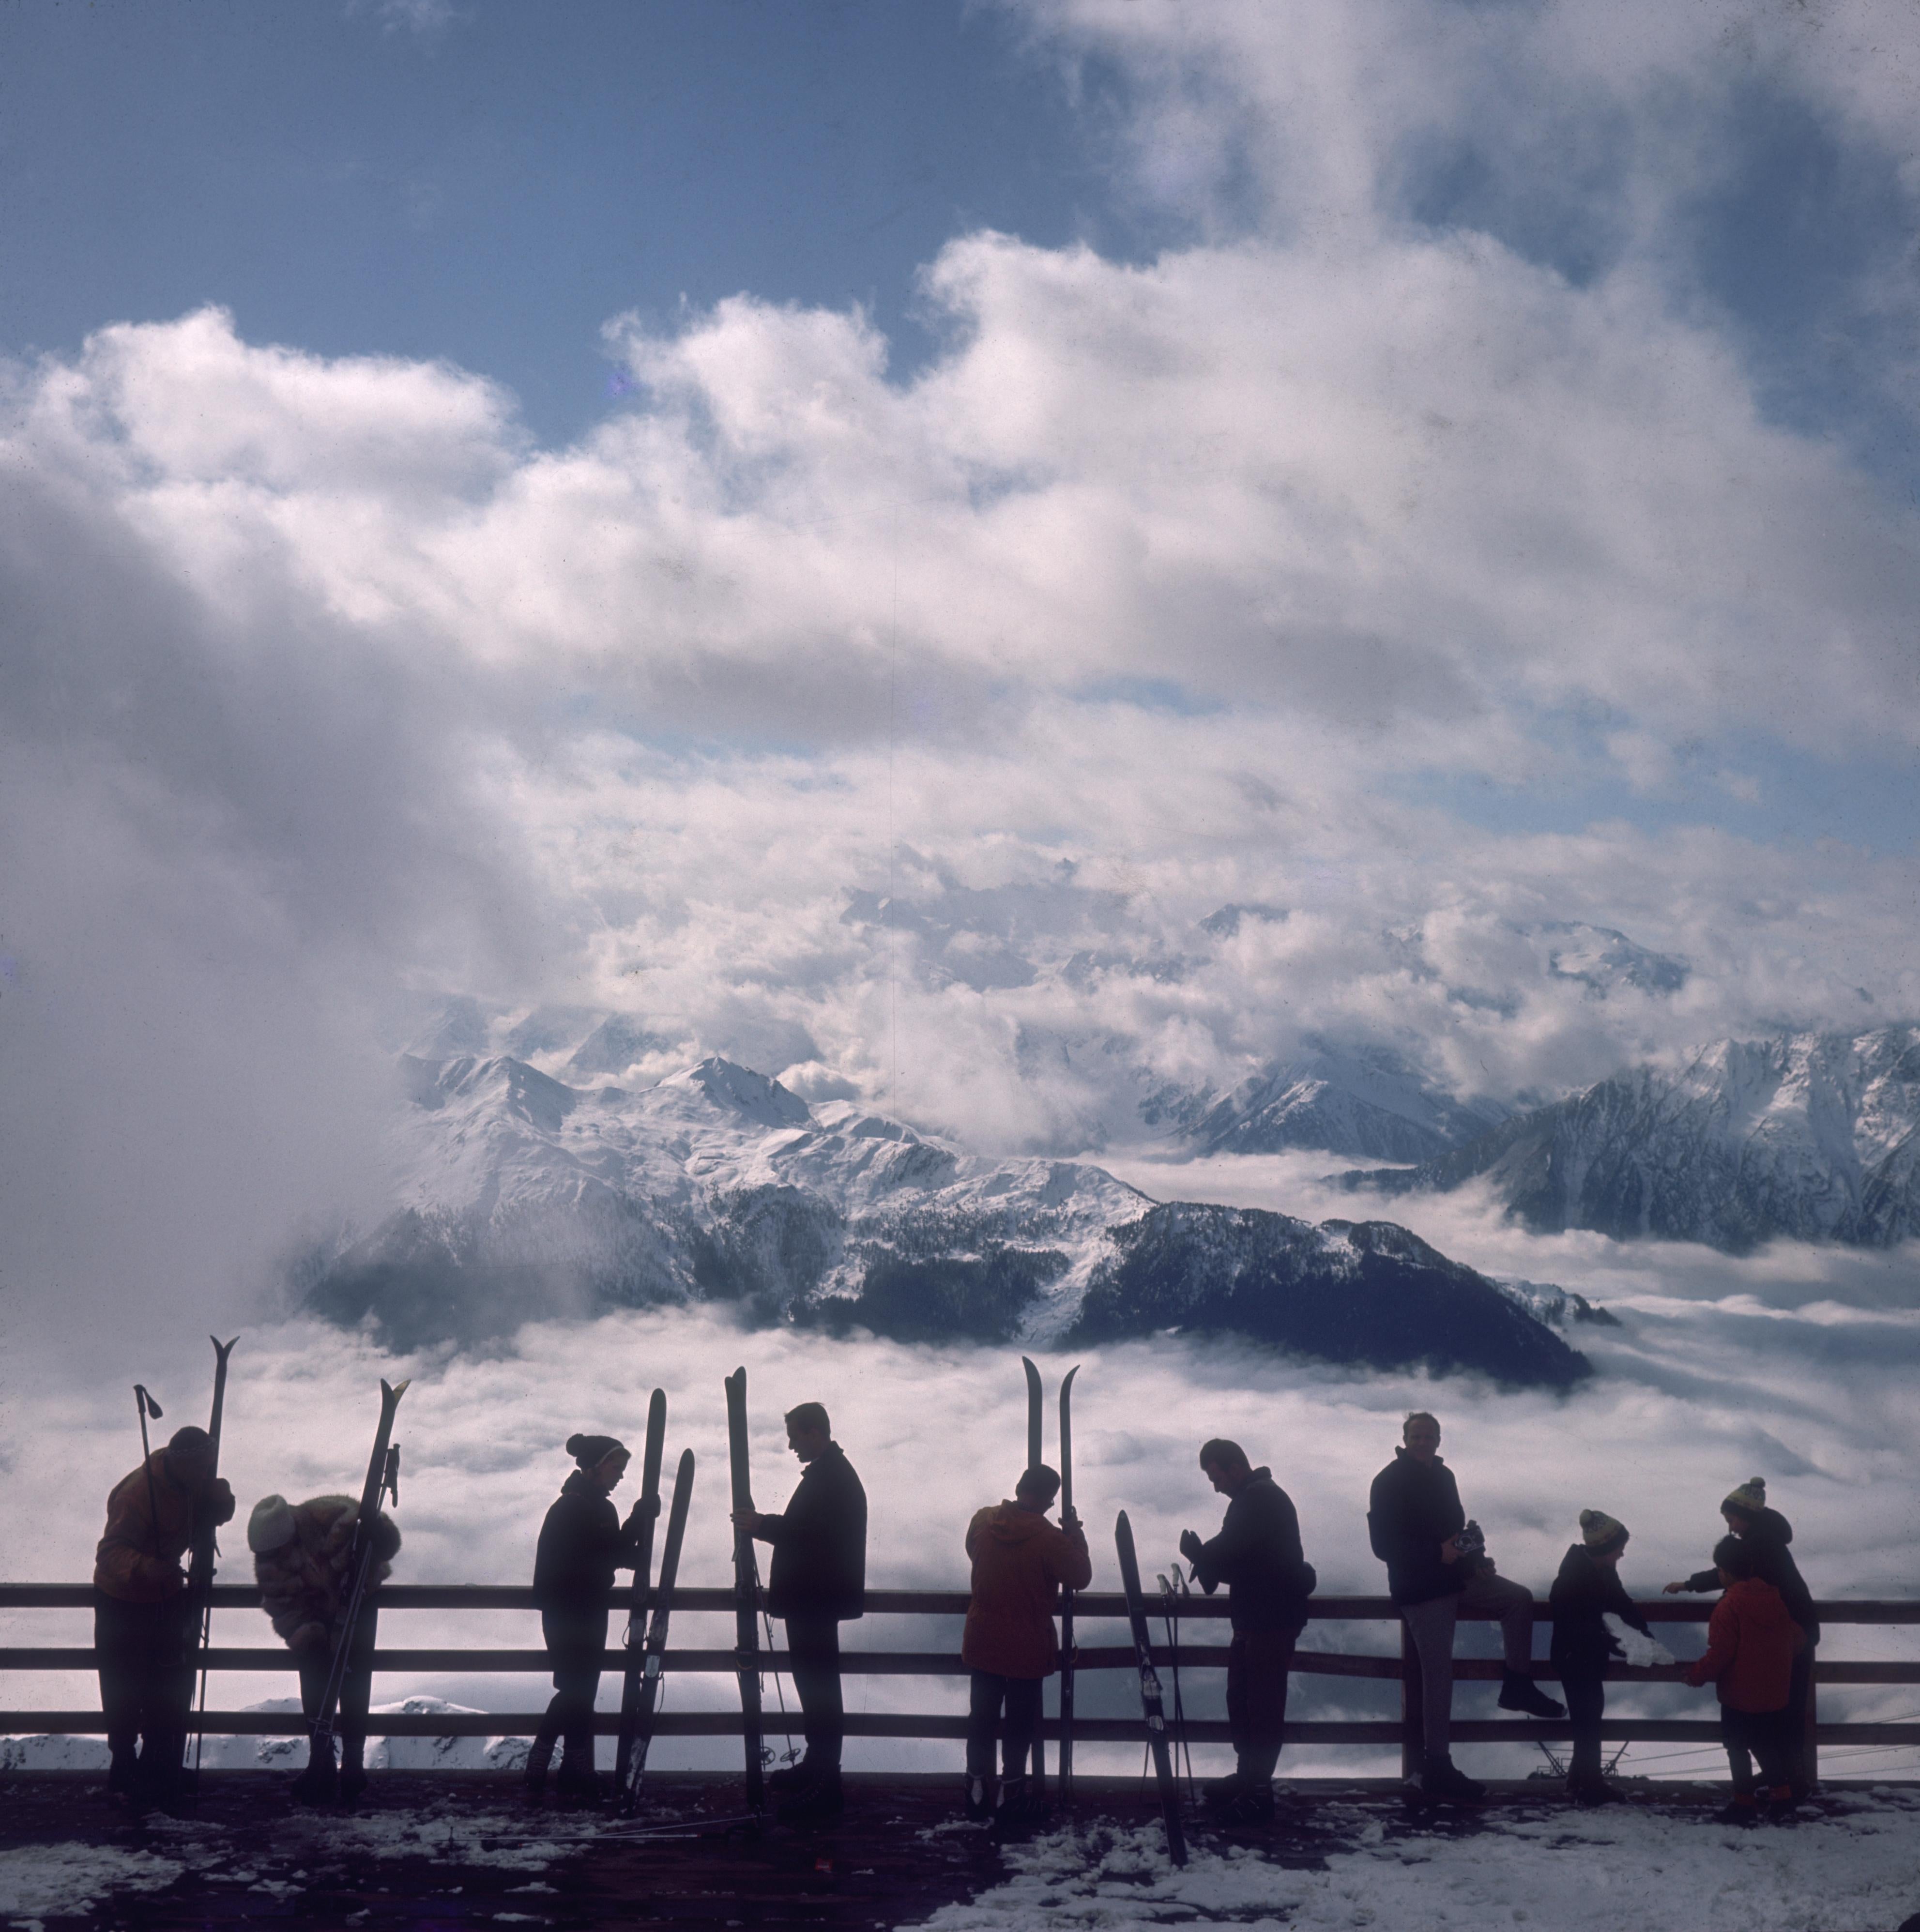 Slim Aarons
Verbier View, 1964. (printed later)
Archival pigment print
60 x 60 inches
Estate stamped and numbered edition of 150 
with Certificate of authenticity

Skiers admire the view across a valley of clouds at Verbier, 1964.

Slim Aarons